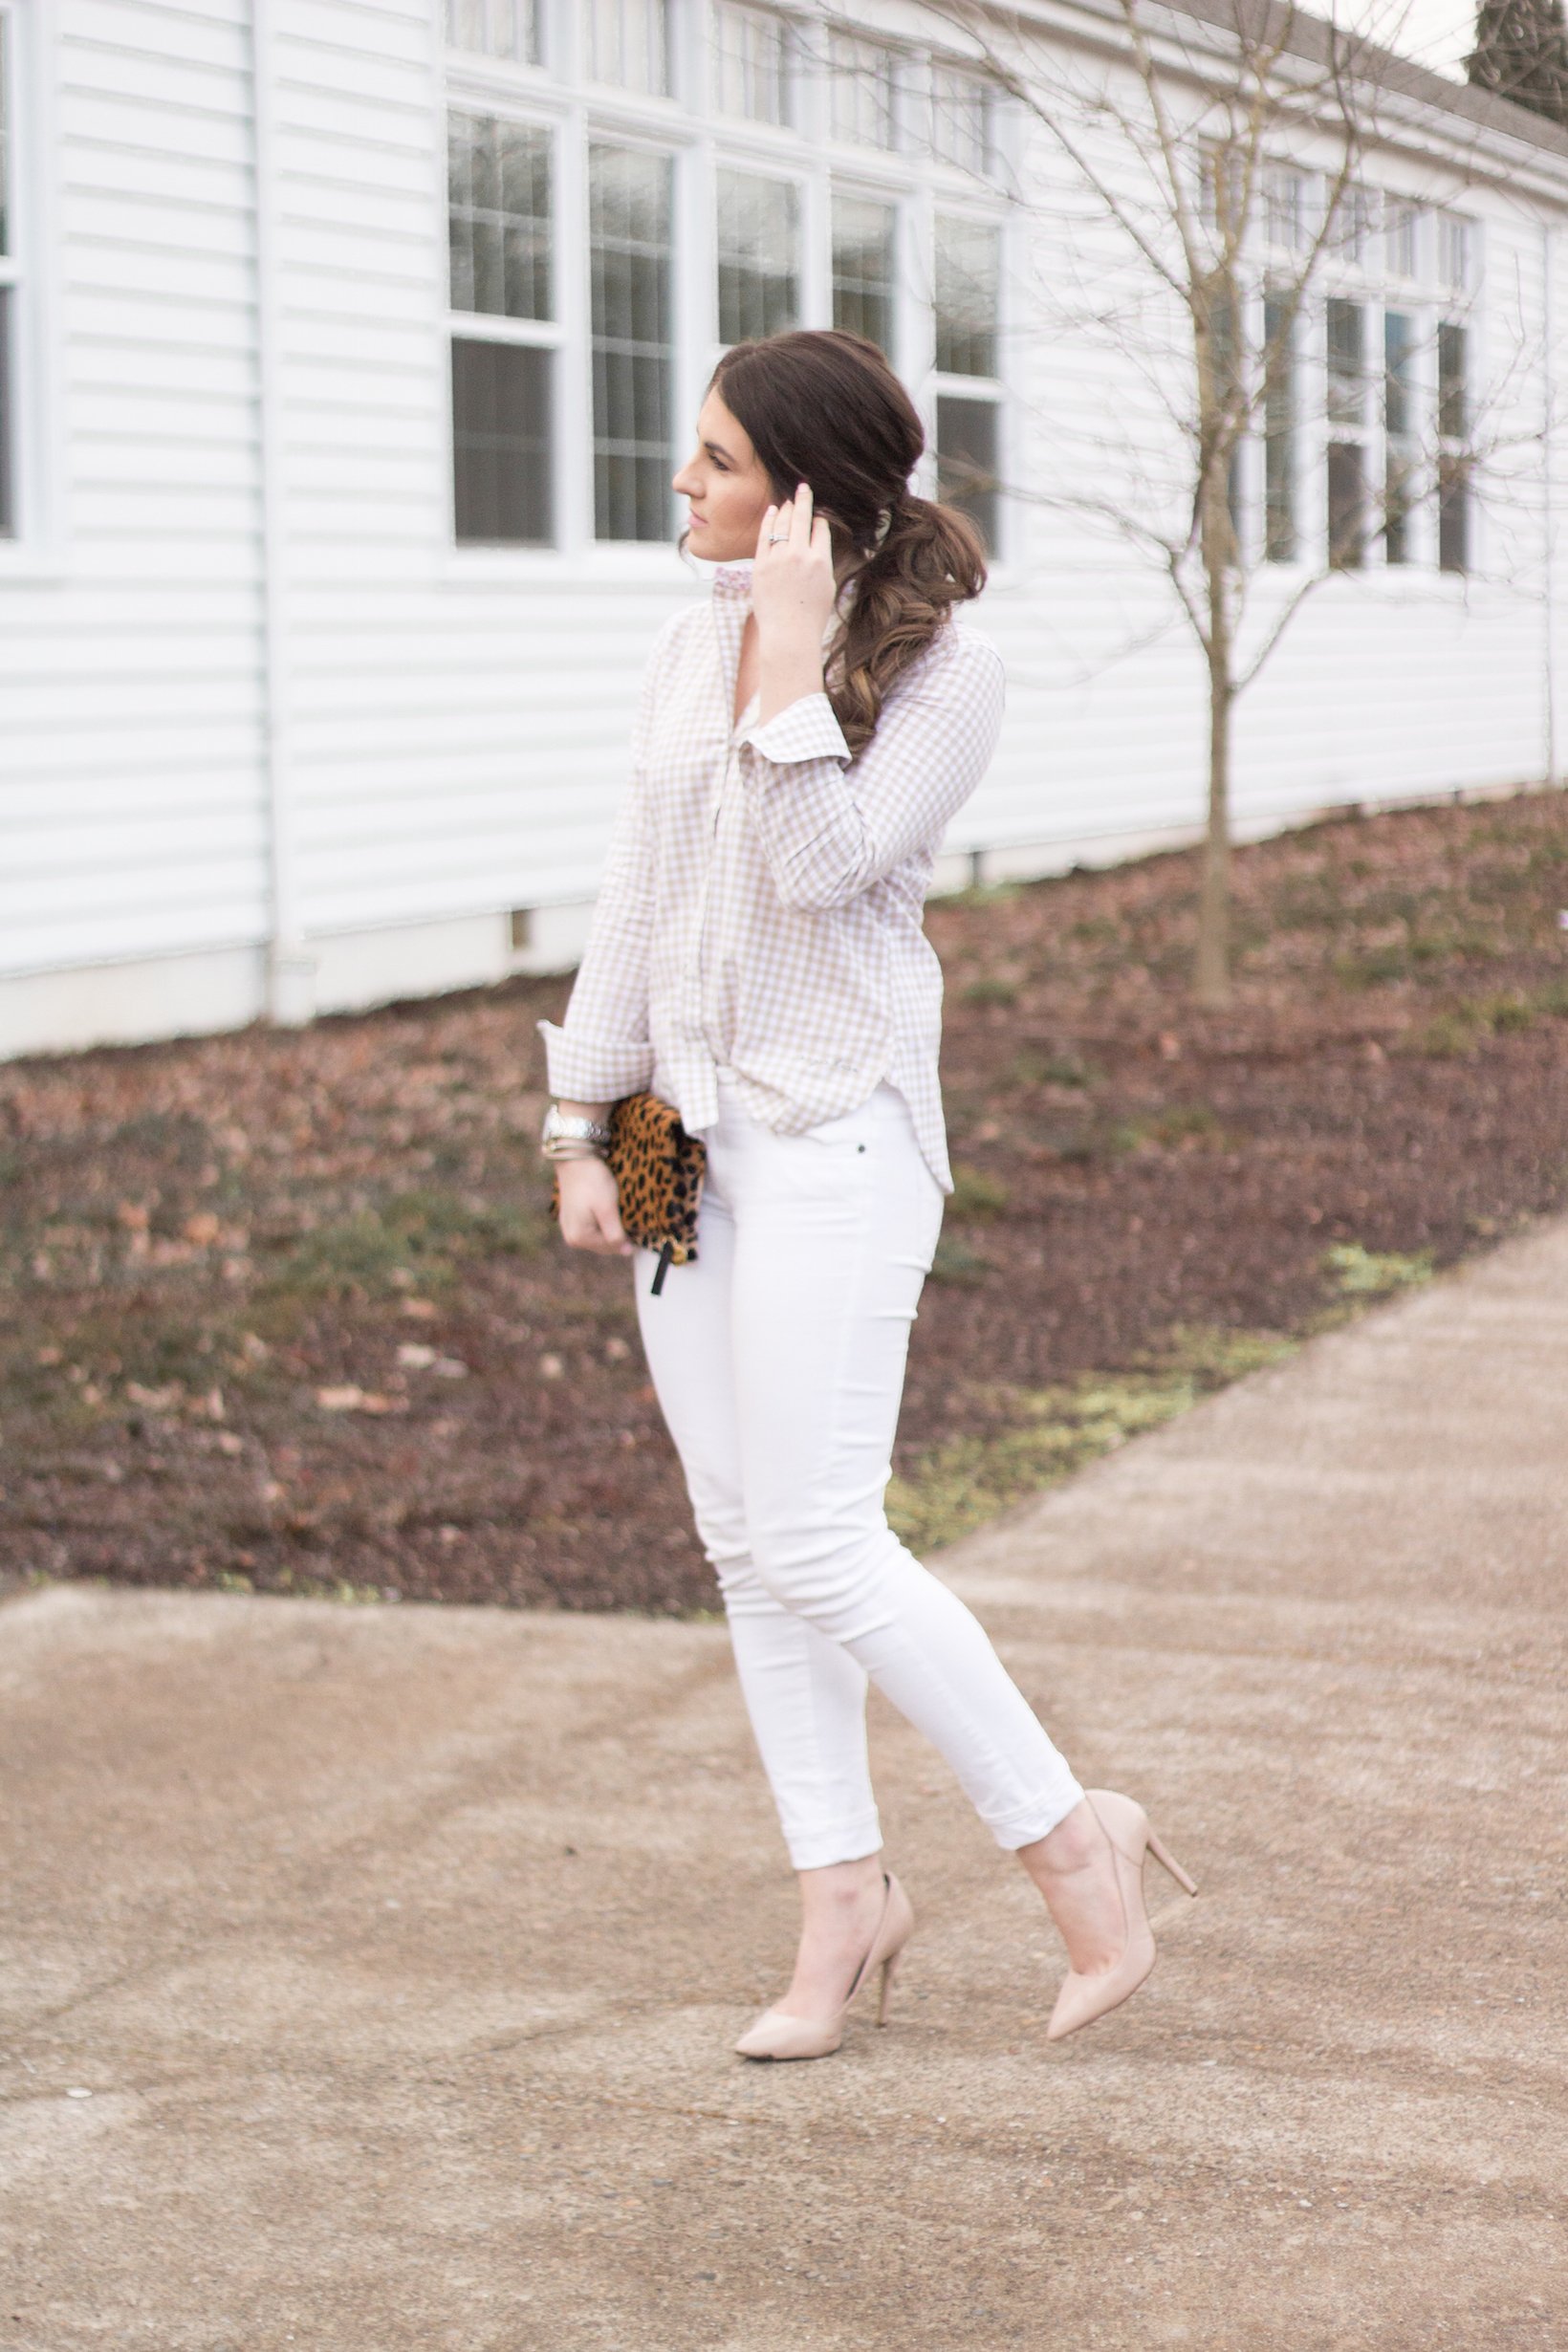 I'm sharing how to wear a button up 2 ways, dressy and casually.